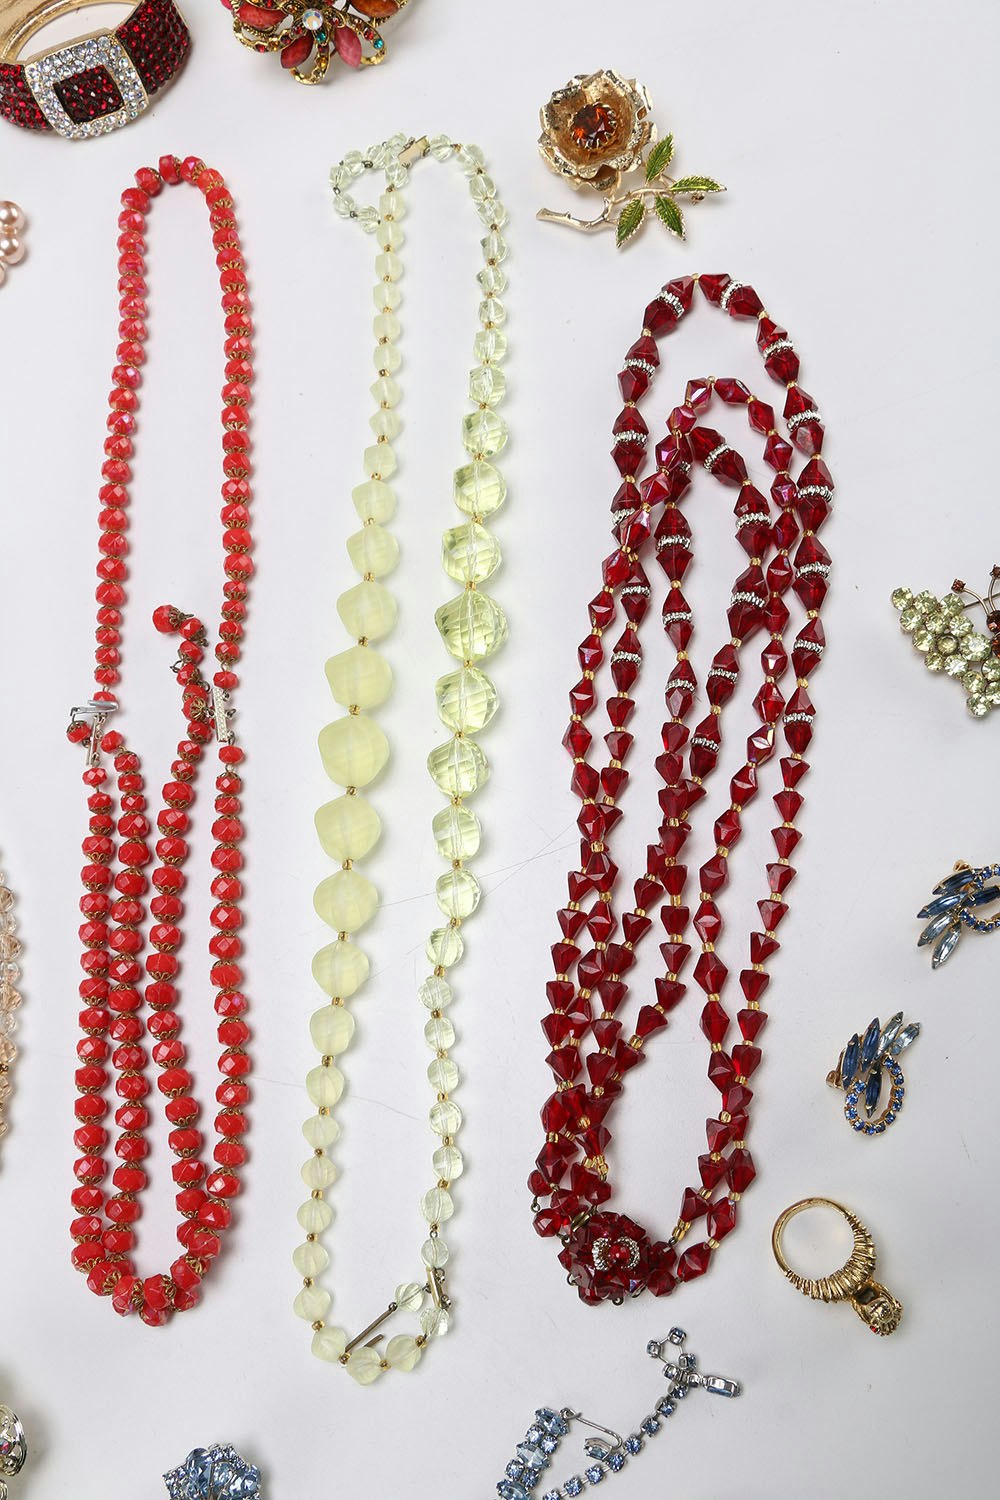 Selection of Colorful Costume Jewelry | EBTH